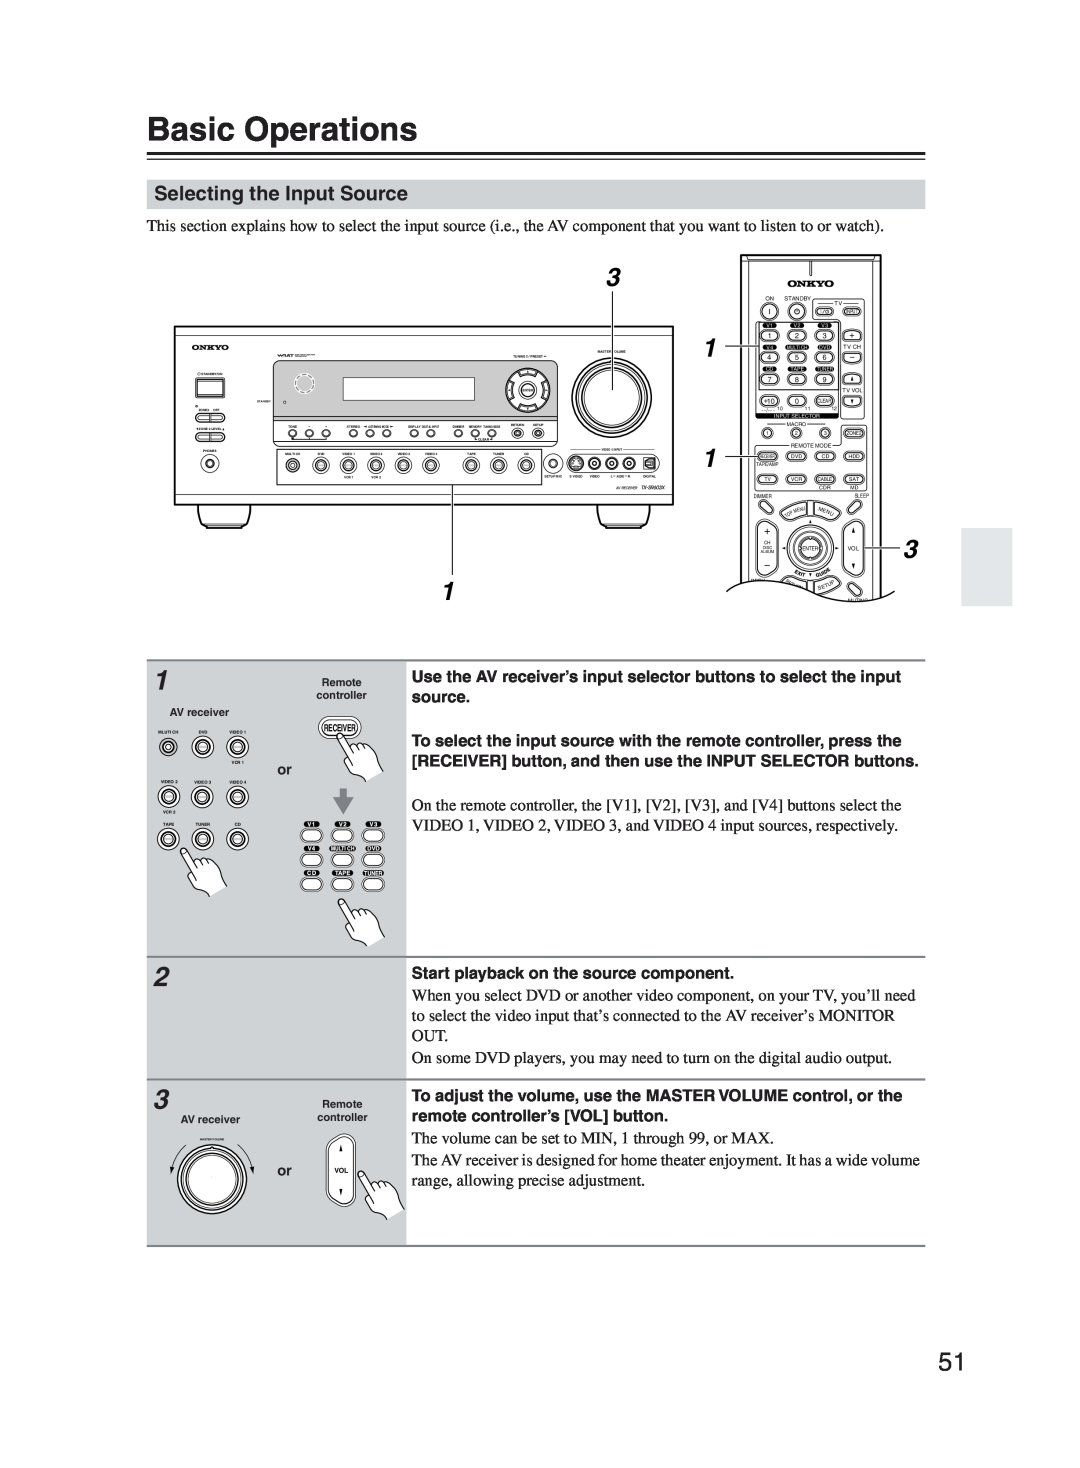 Onkyo TX-SR603X instruction manual Basic Operations, Selecting the Input Source 